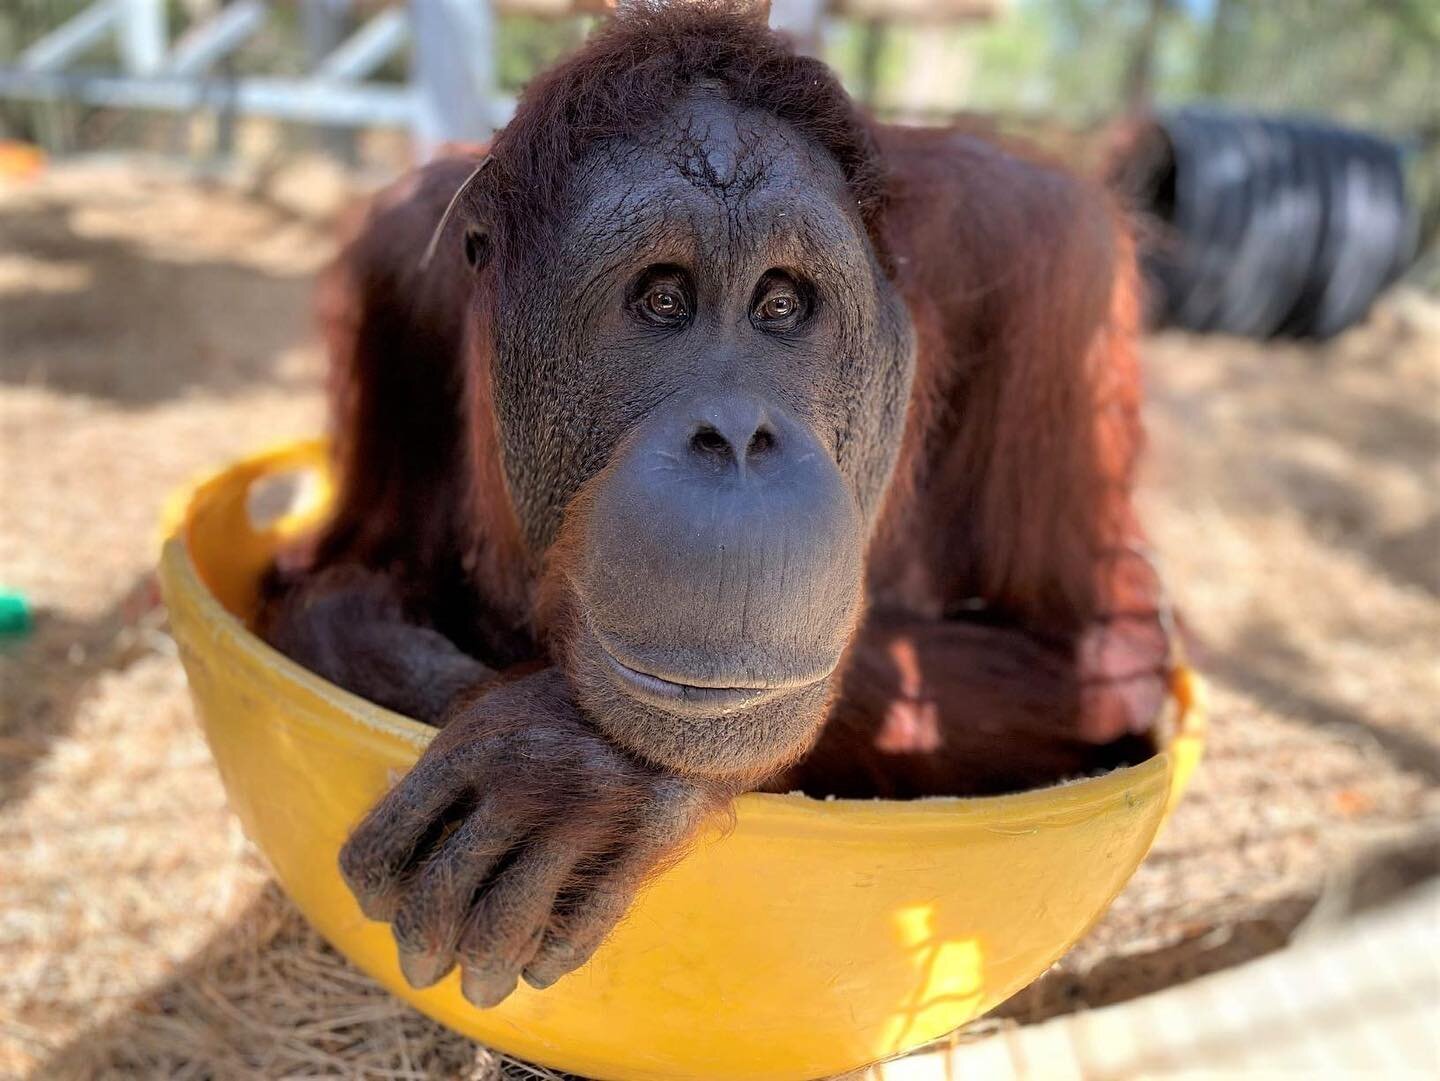 Did you know that great apes can live in captivity for over 50 years? The long-term financial commitment is a major responsibility for primate sanctuaries.

One of our programs will be to provide financial support for primate sanctuaries &amp; rehabi